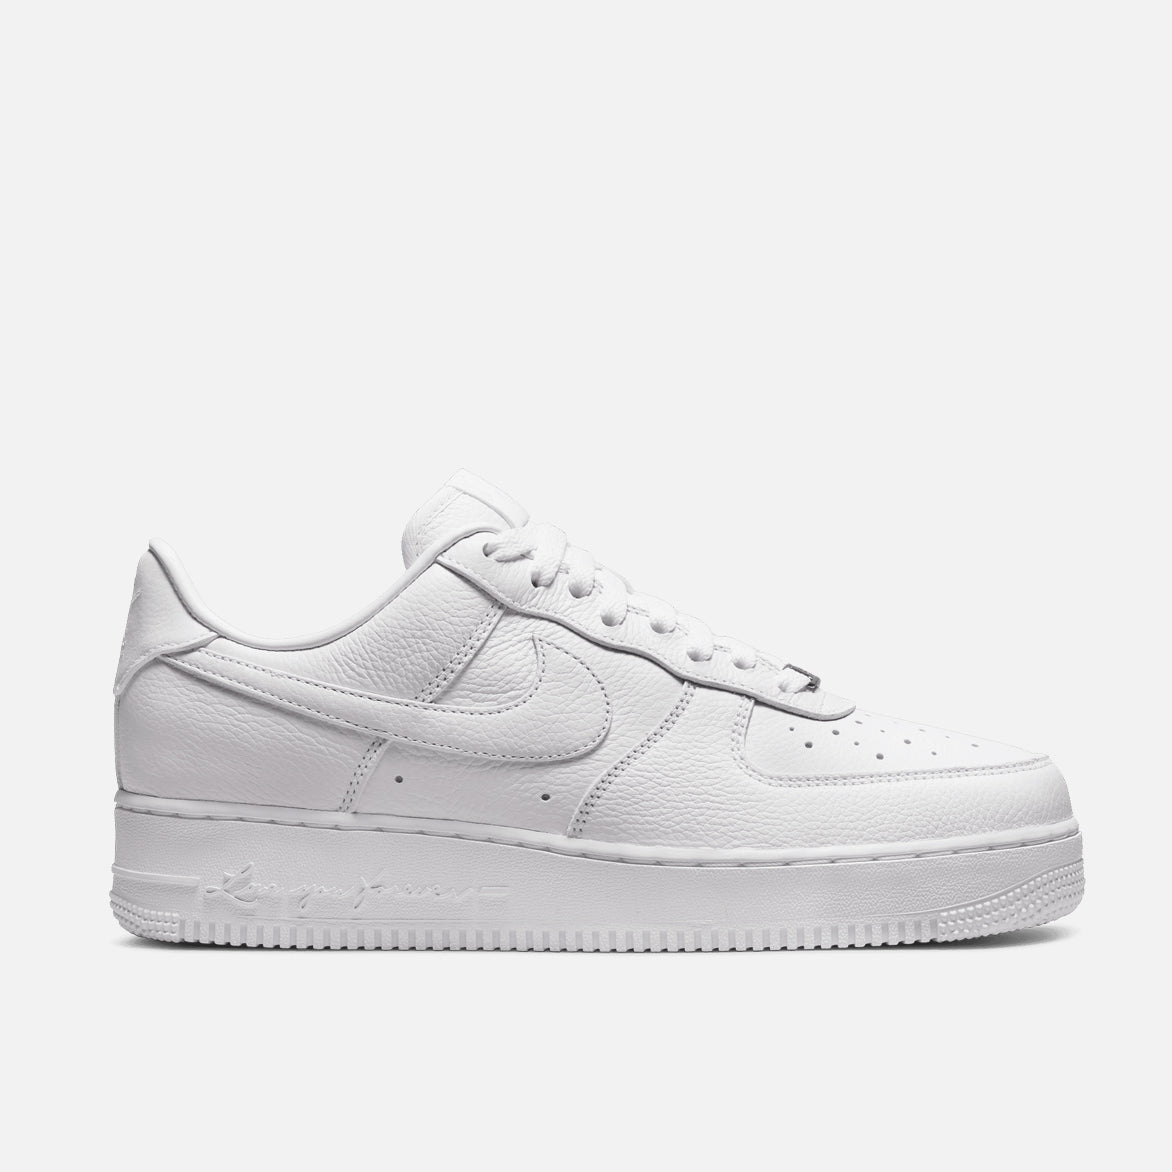 NOCTA X NIKE AIR FORCE 1 LOW 